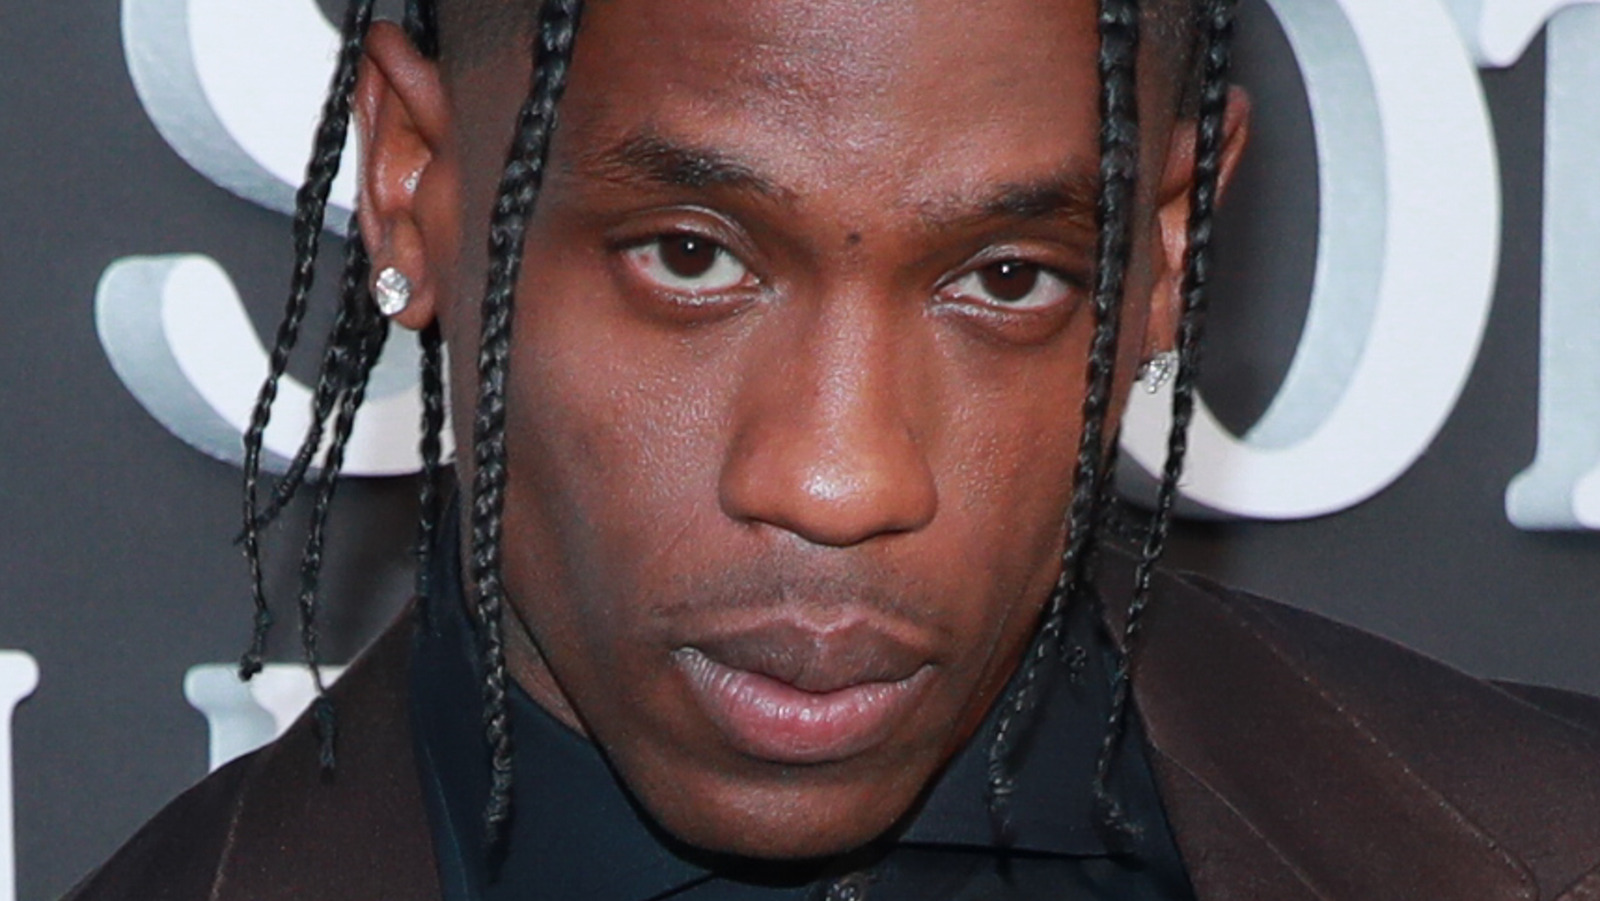 Here’s how much Travis Scott is really worth